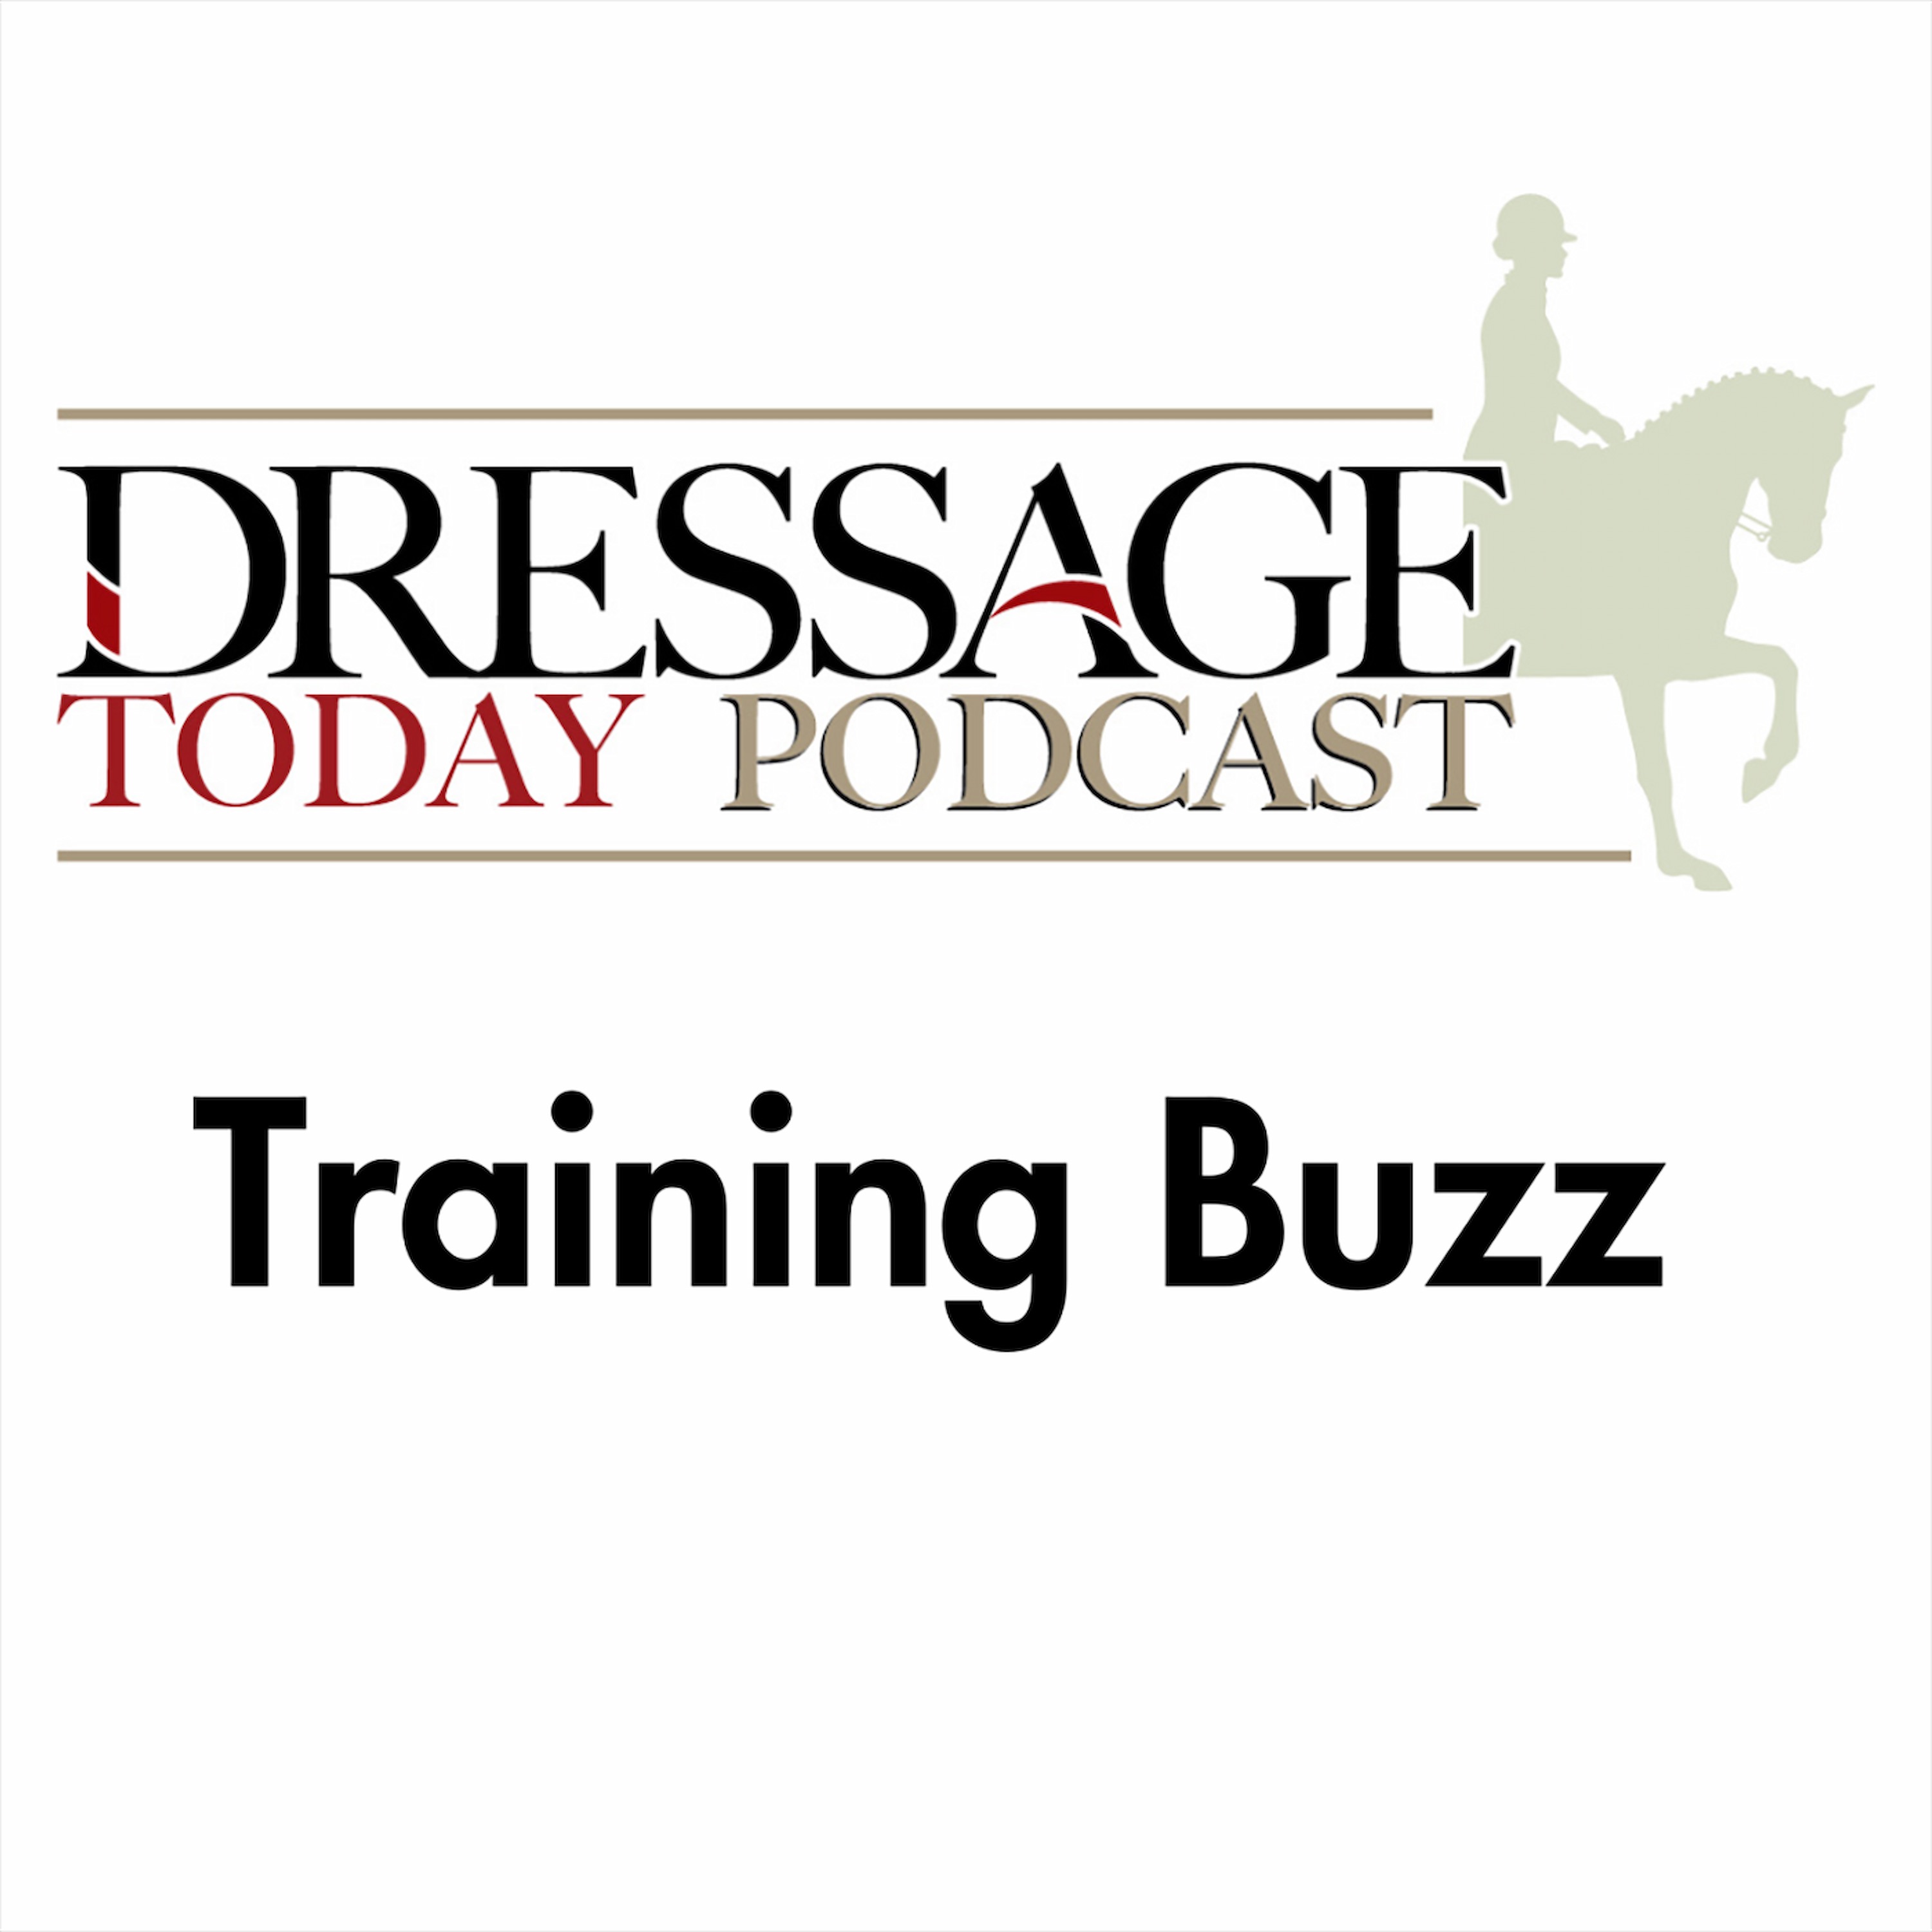 Training Buzz: Systematic Training with Felicitas von Neumann-Cosel - Dressage Today Podcast